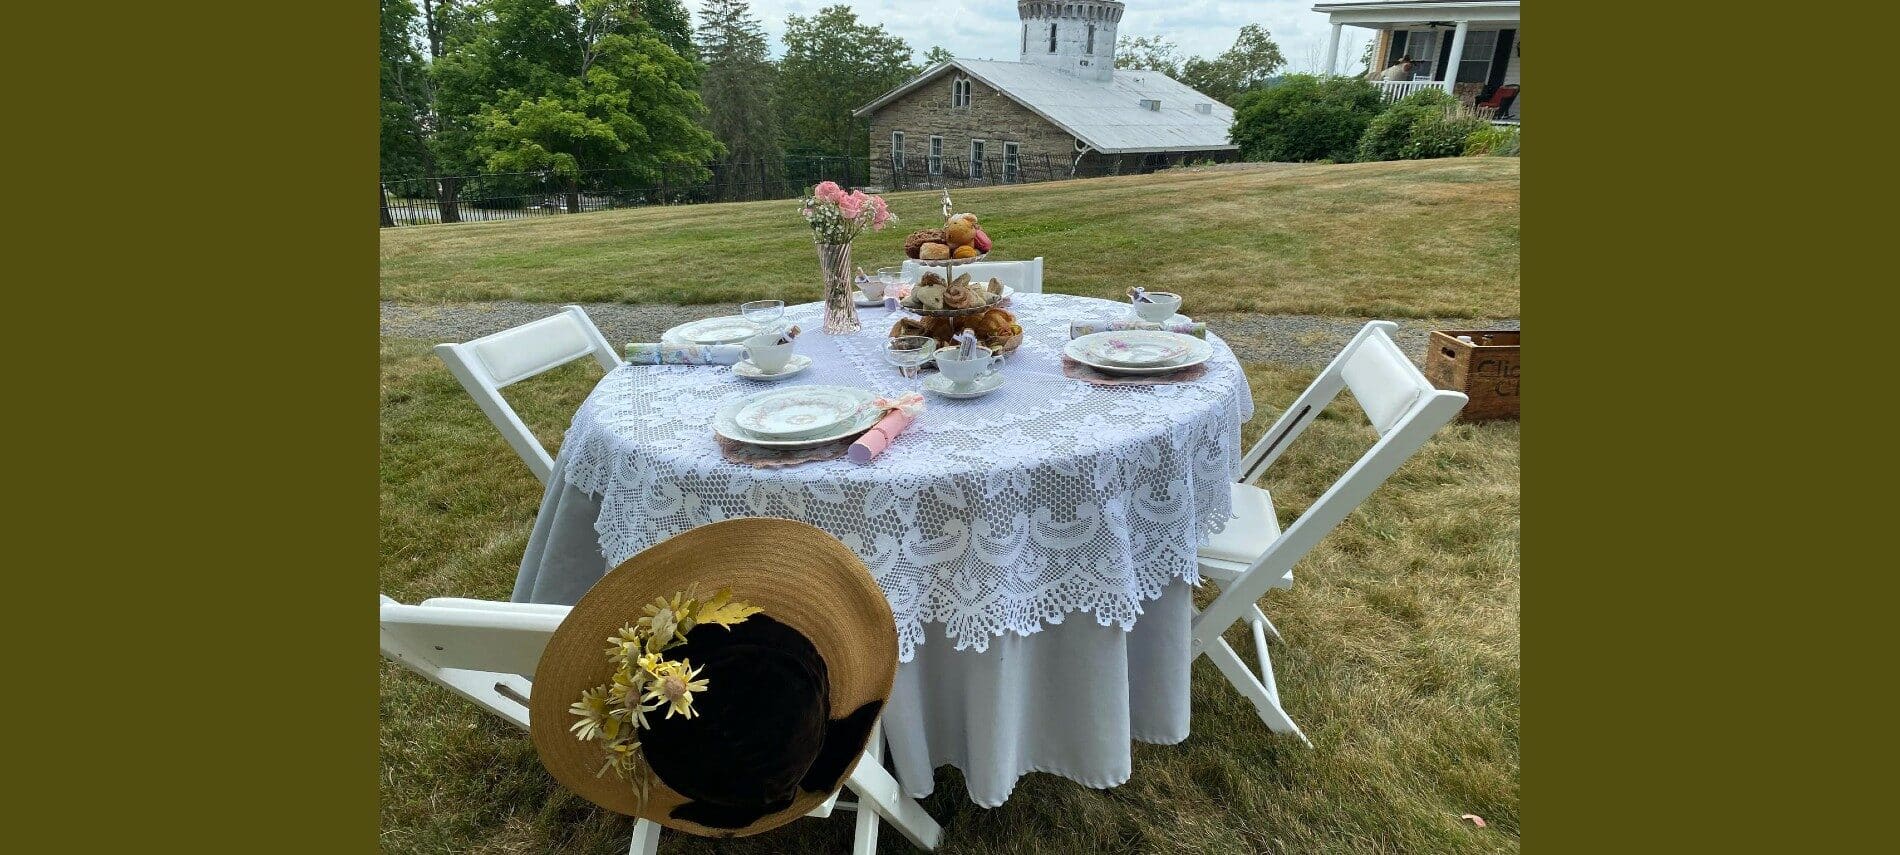 Small table on the lawn with a lace table cloth and pastries.